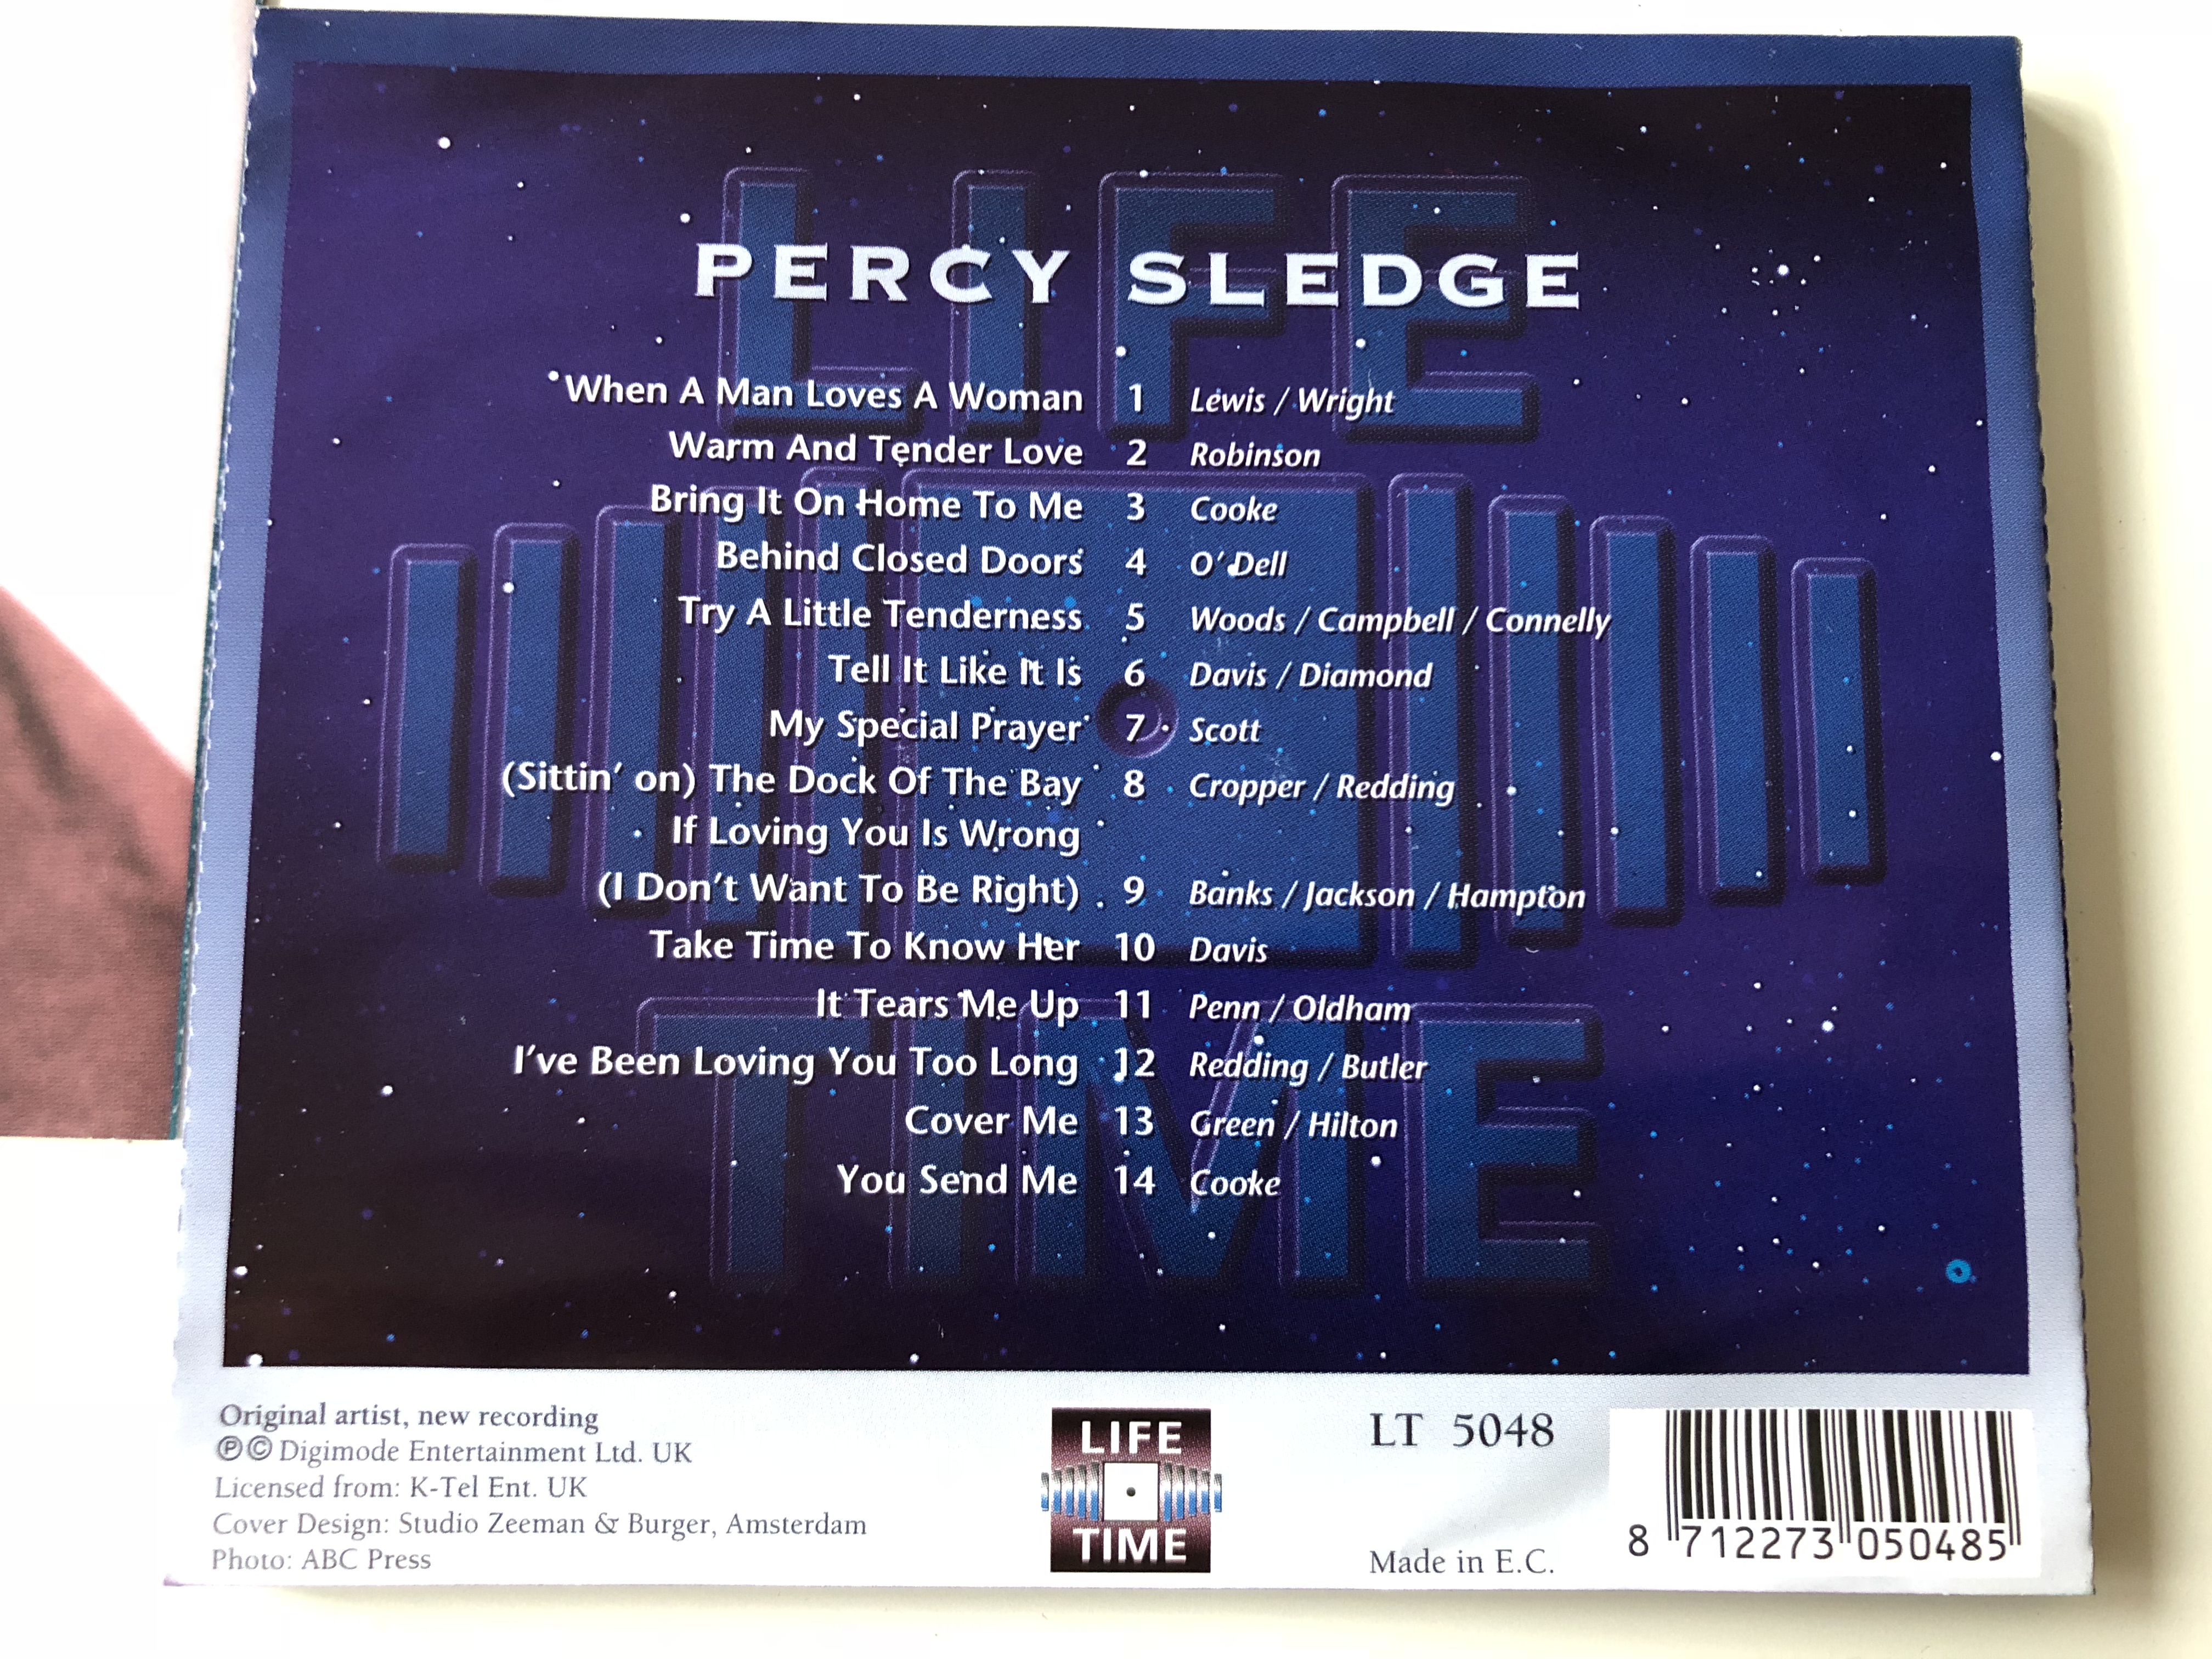 percy-sledge-try-a-little-tenderness-warm-and-tender-love-my-special-prayer-take-time-to-know-her-audio-cd-lt-5048-2-.jpg